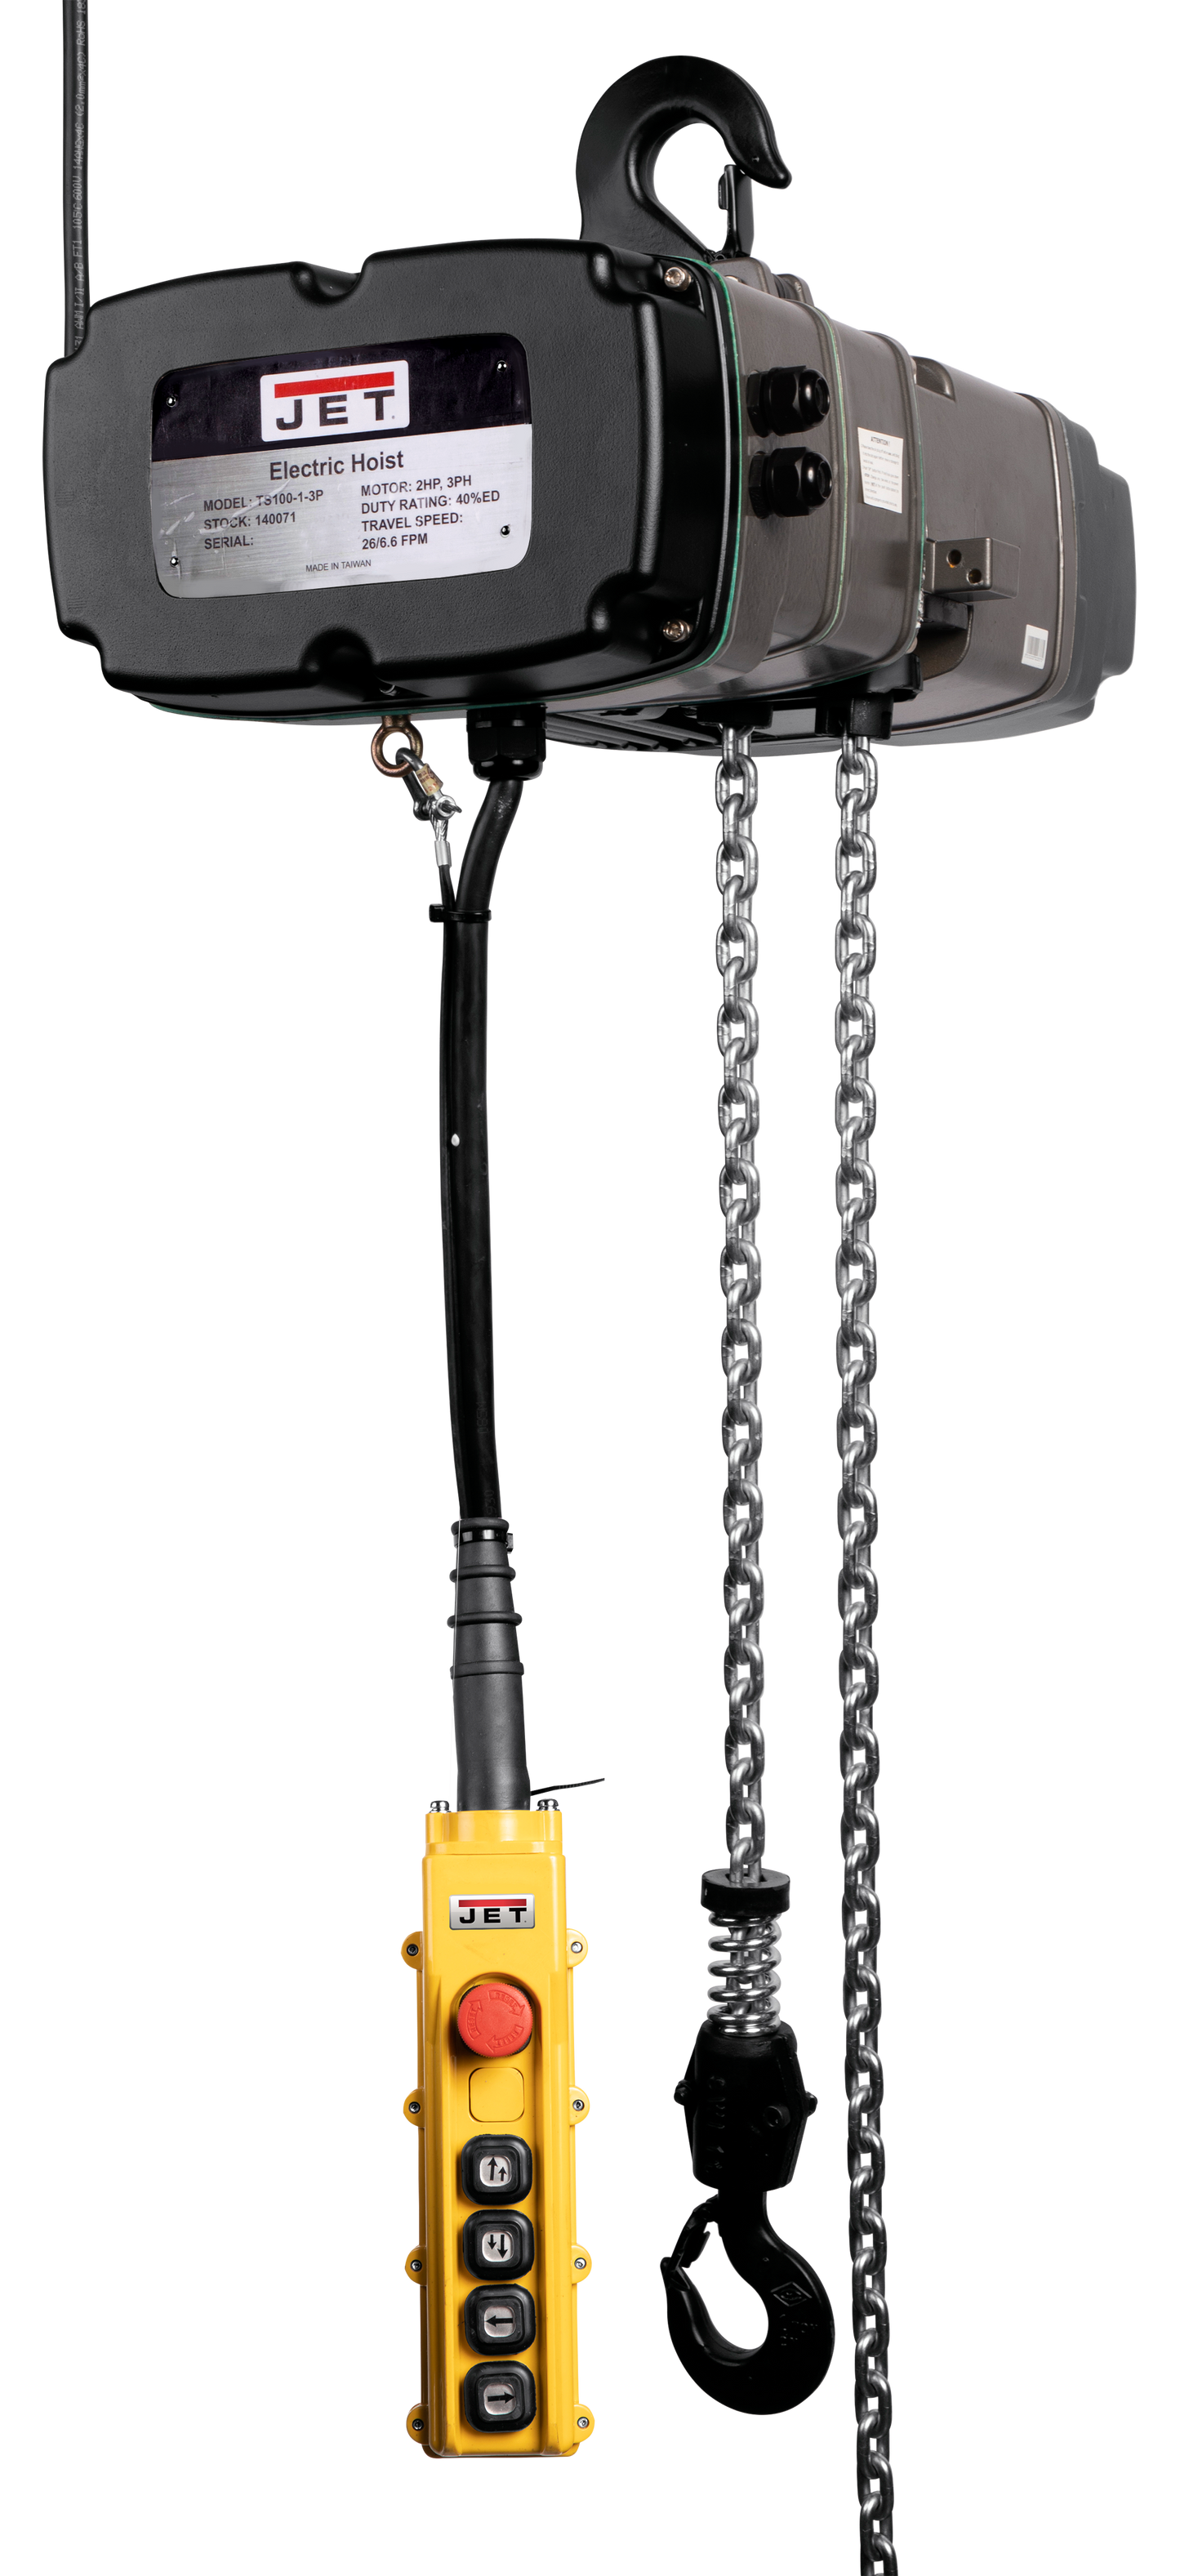 TS300-020 3T Electric Hoist 460V  with Trolley & 4 Button Pendant